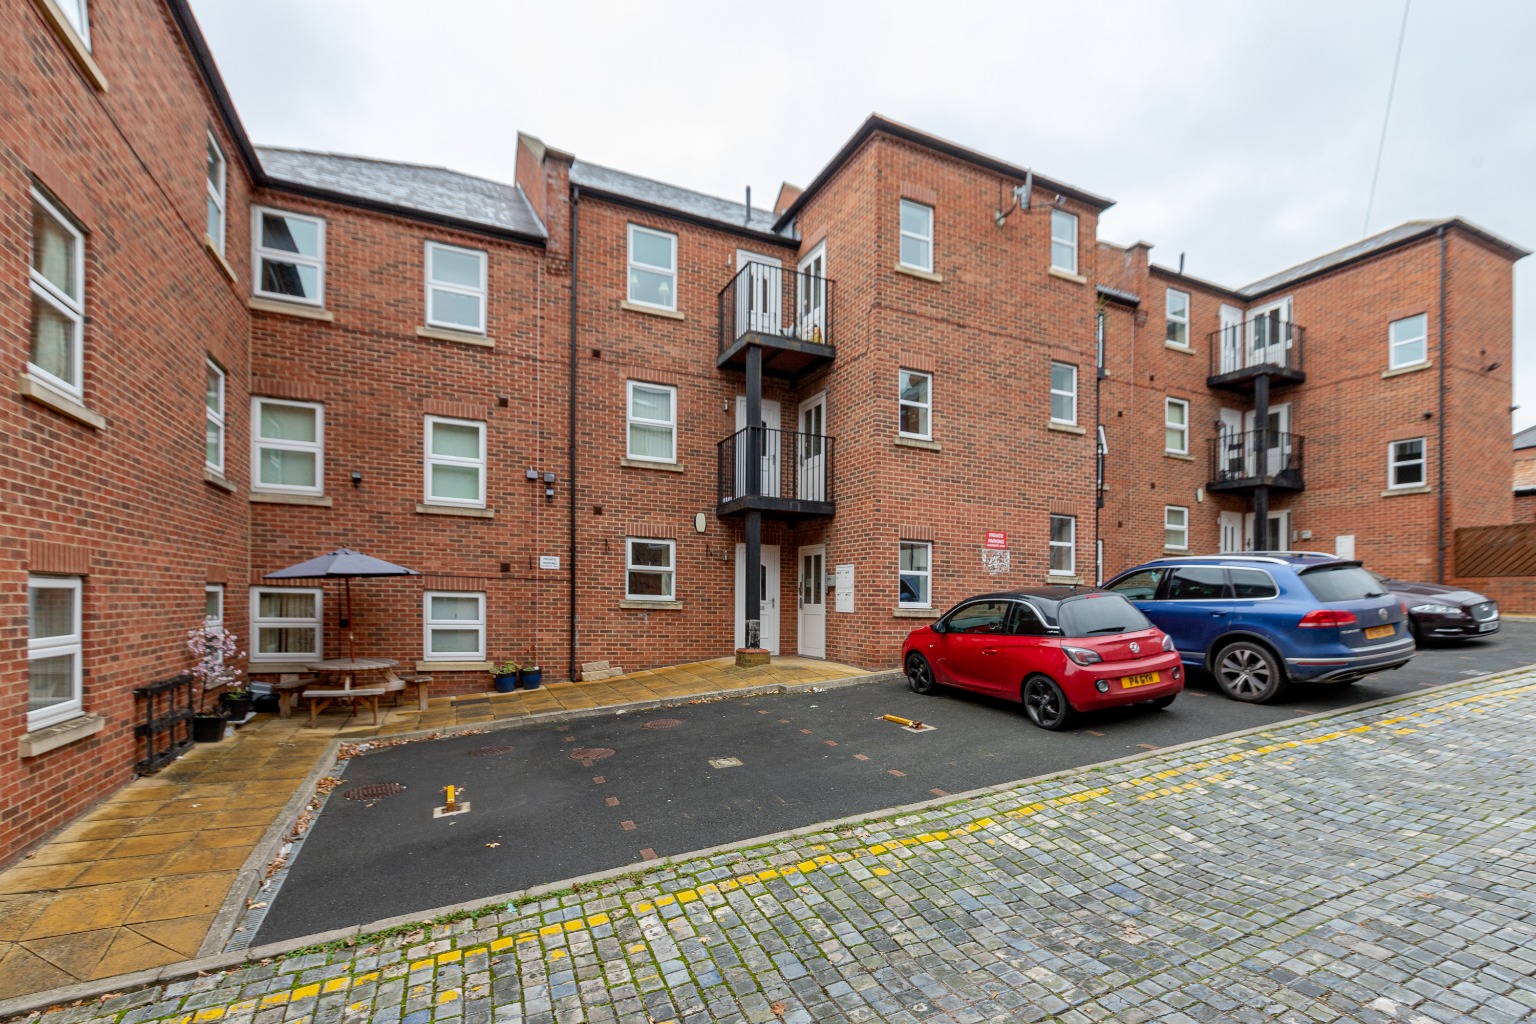 2 bed ground floor flat to rent in Hargreave Terrace, Darlington  - Property Image 8